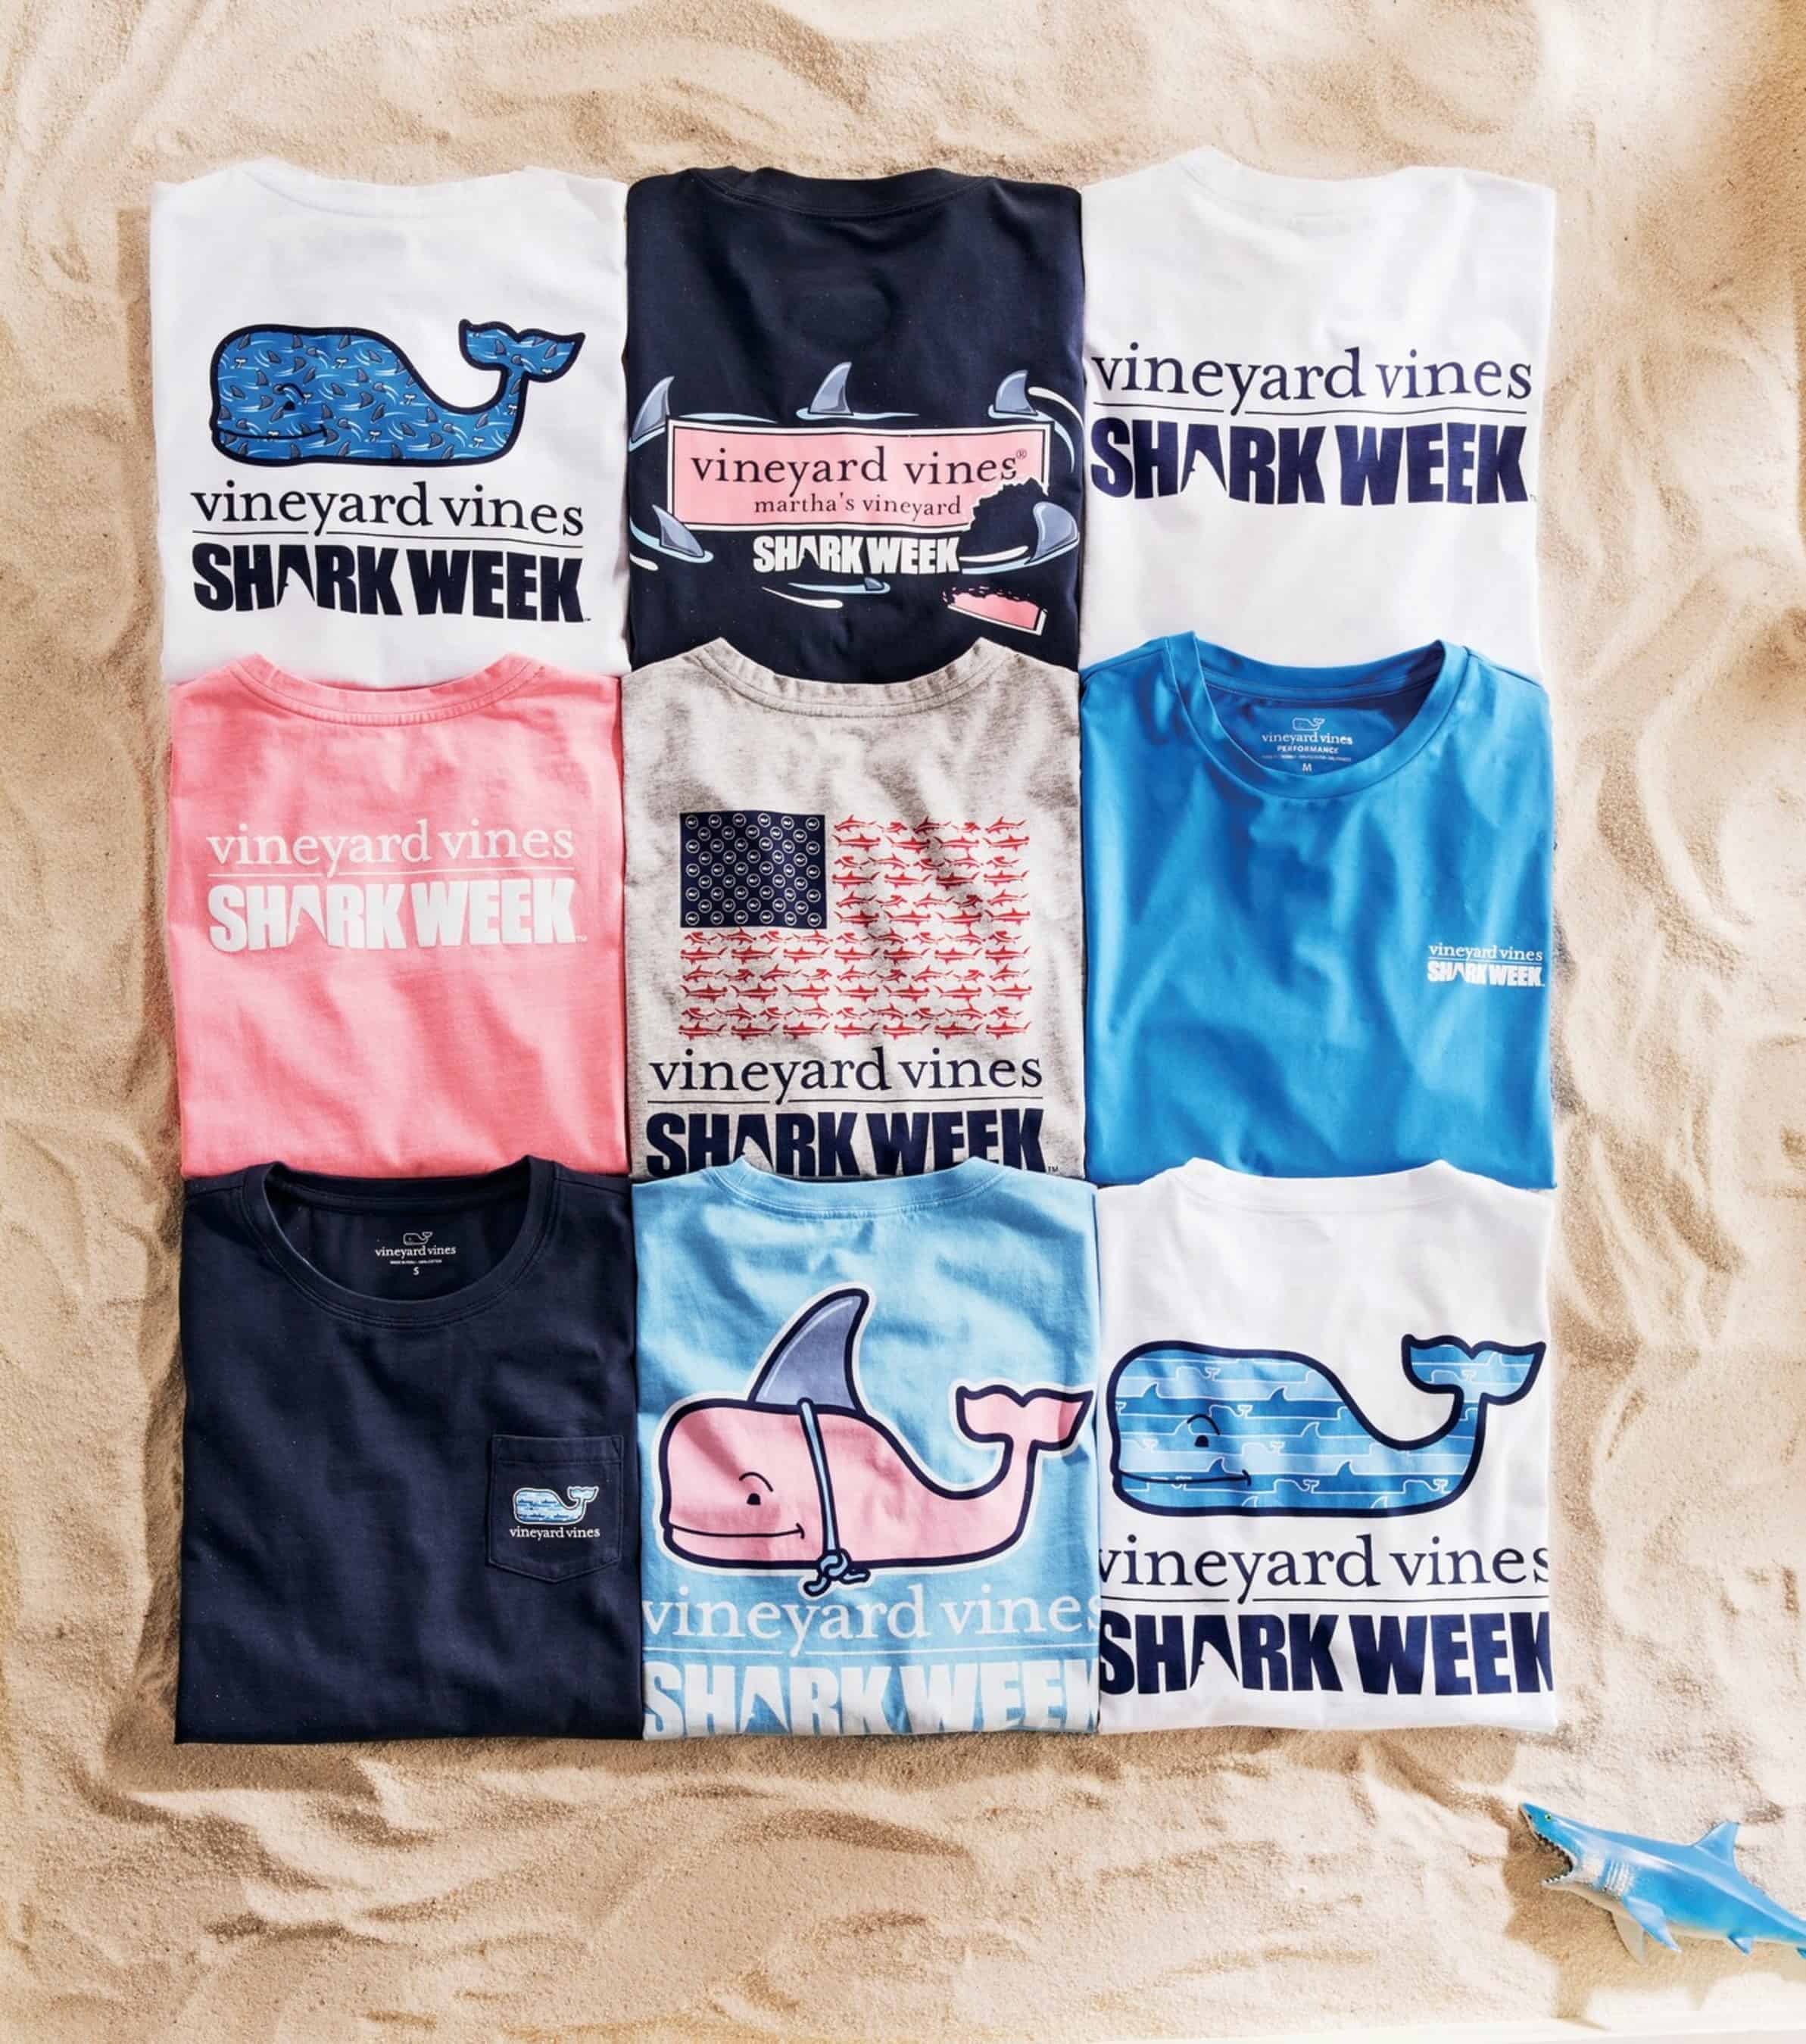 VINEYARD VINES TO LAUNCH COLLECTION WITH DISCOVERY CHANNEL’S ‘SHARK WEEK’